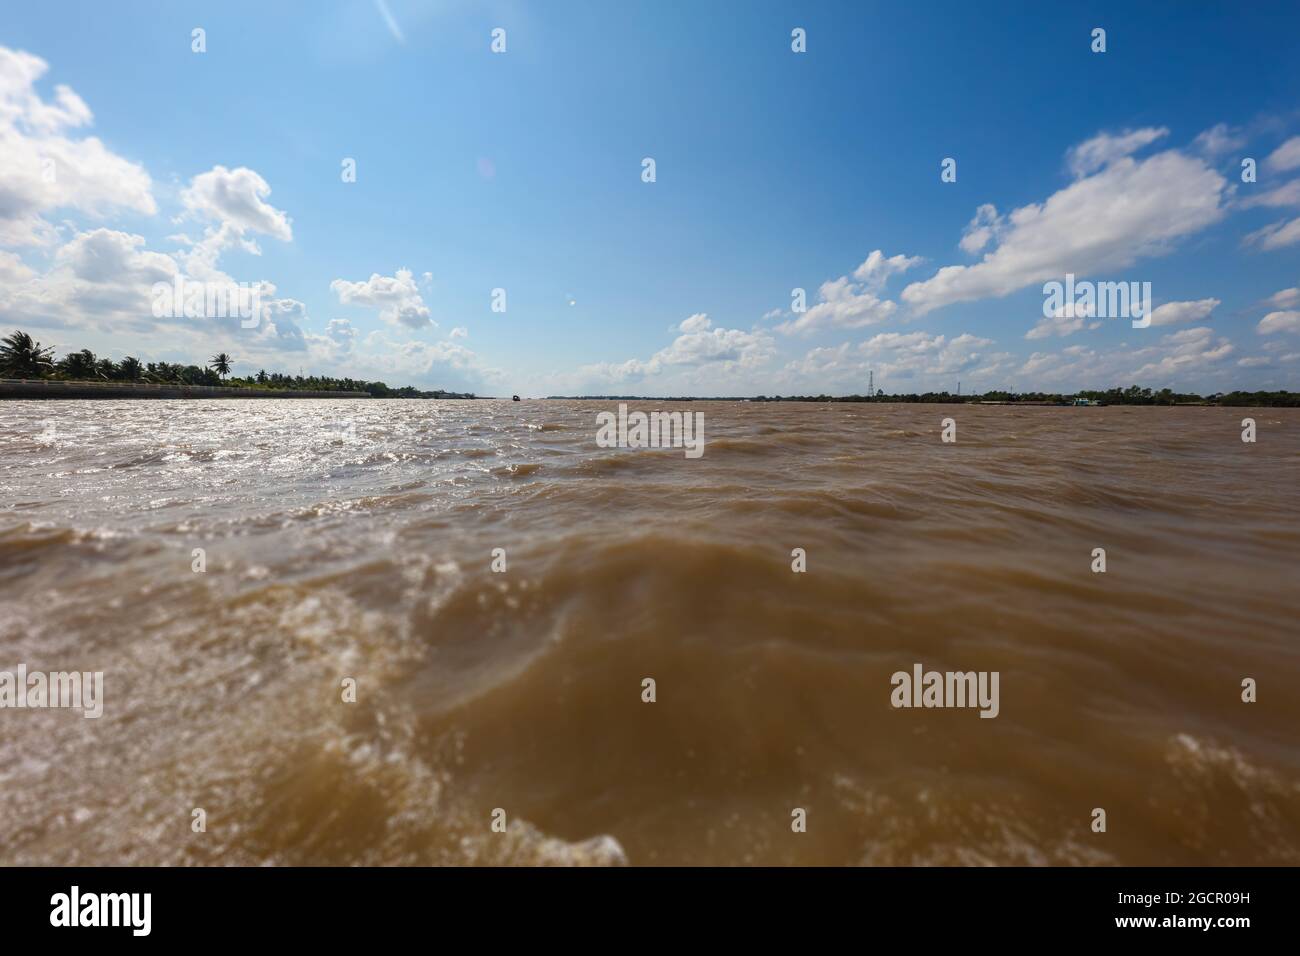 On the Mekong river at Vietnam. Crossing the Mekong river near the city of Saigon or Ho Chi Ming City. Water splashing under blue sky with white cloud Stock Photo